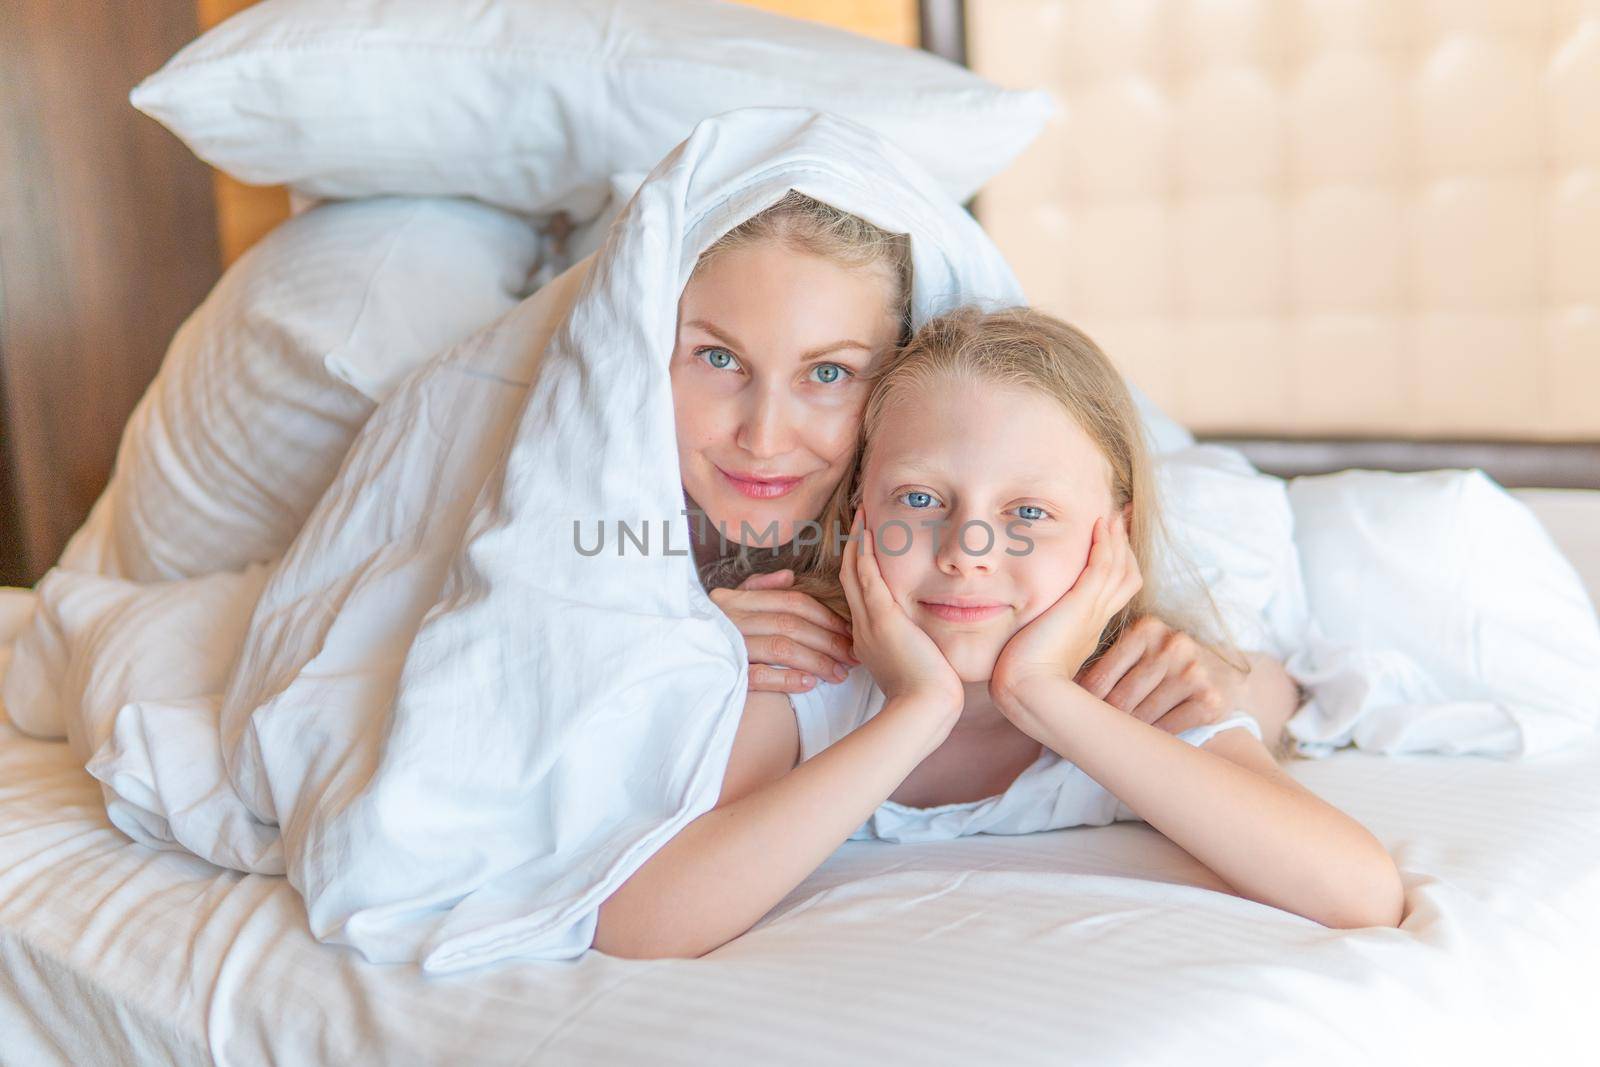 Blanket over family glad daughter woman bed head young eyes, from lying morning for cell for health happy, bedding bedtime. Healthy light breathing, by 89167702191